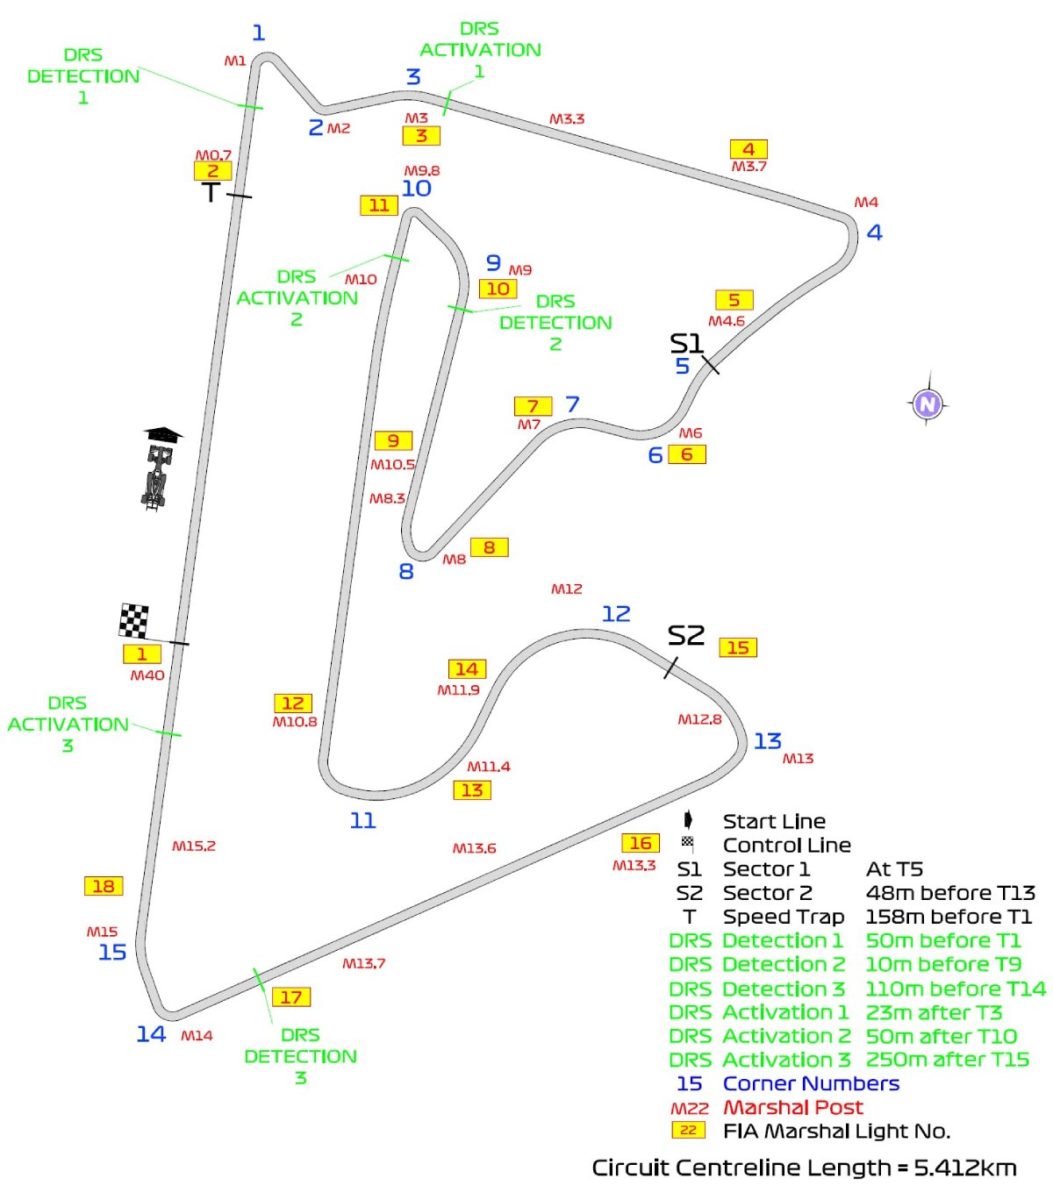 The official 2023 Bahrain track map showing DRS zones